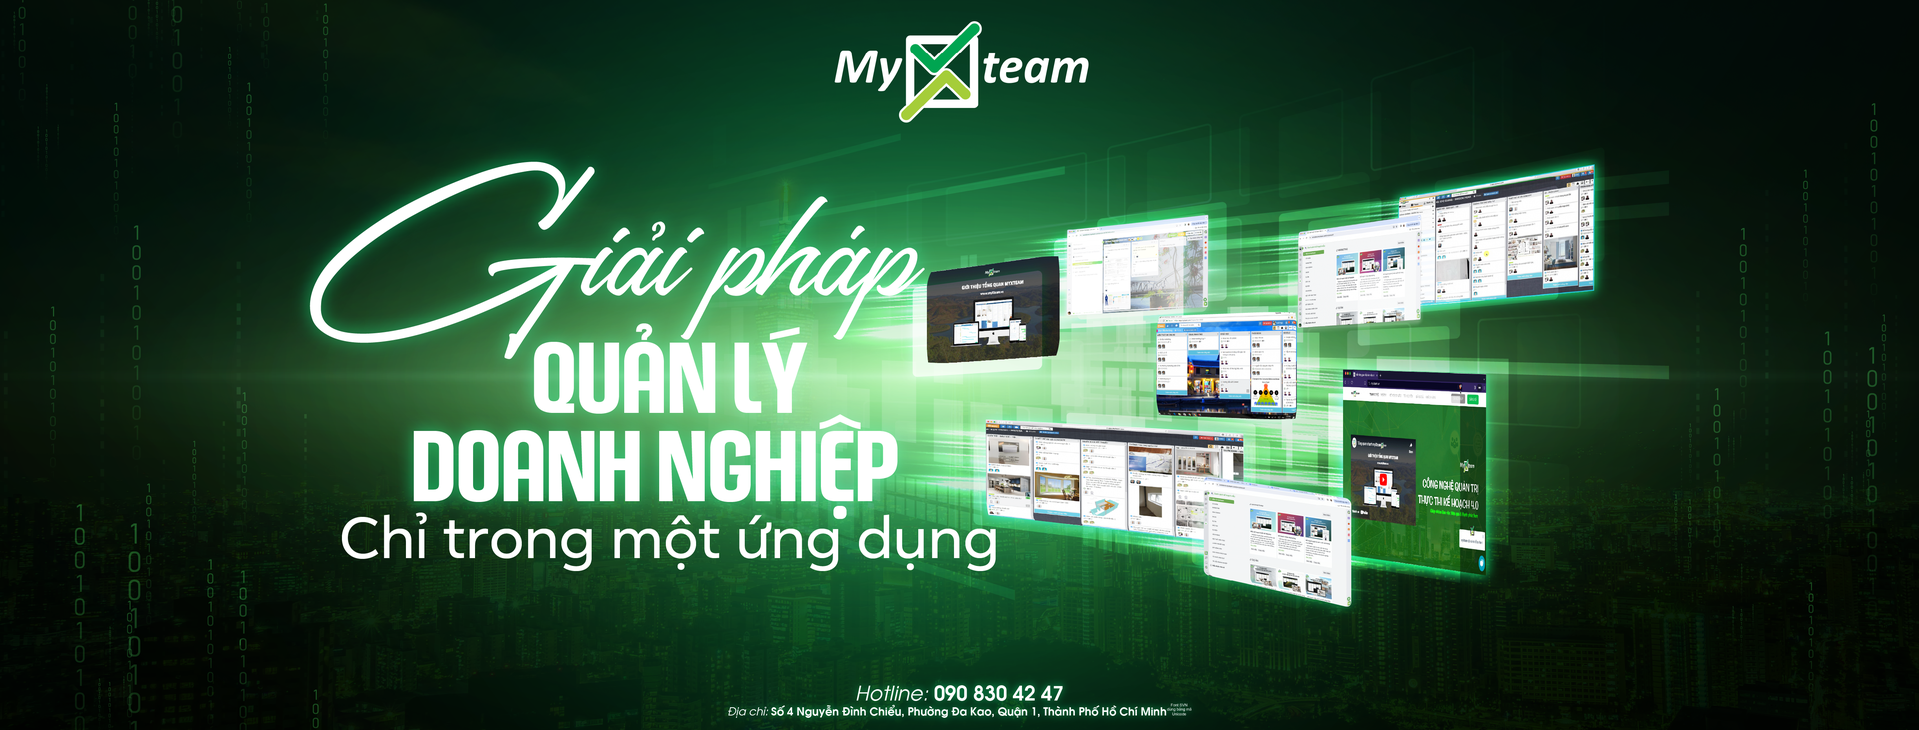 Cover image for CÔNG TY CỔ PHẦN MYXTEAM